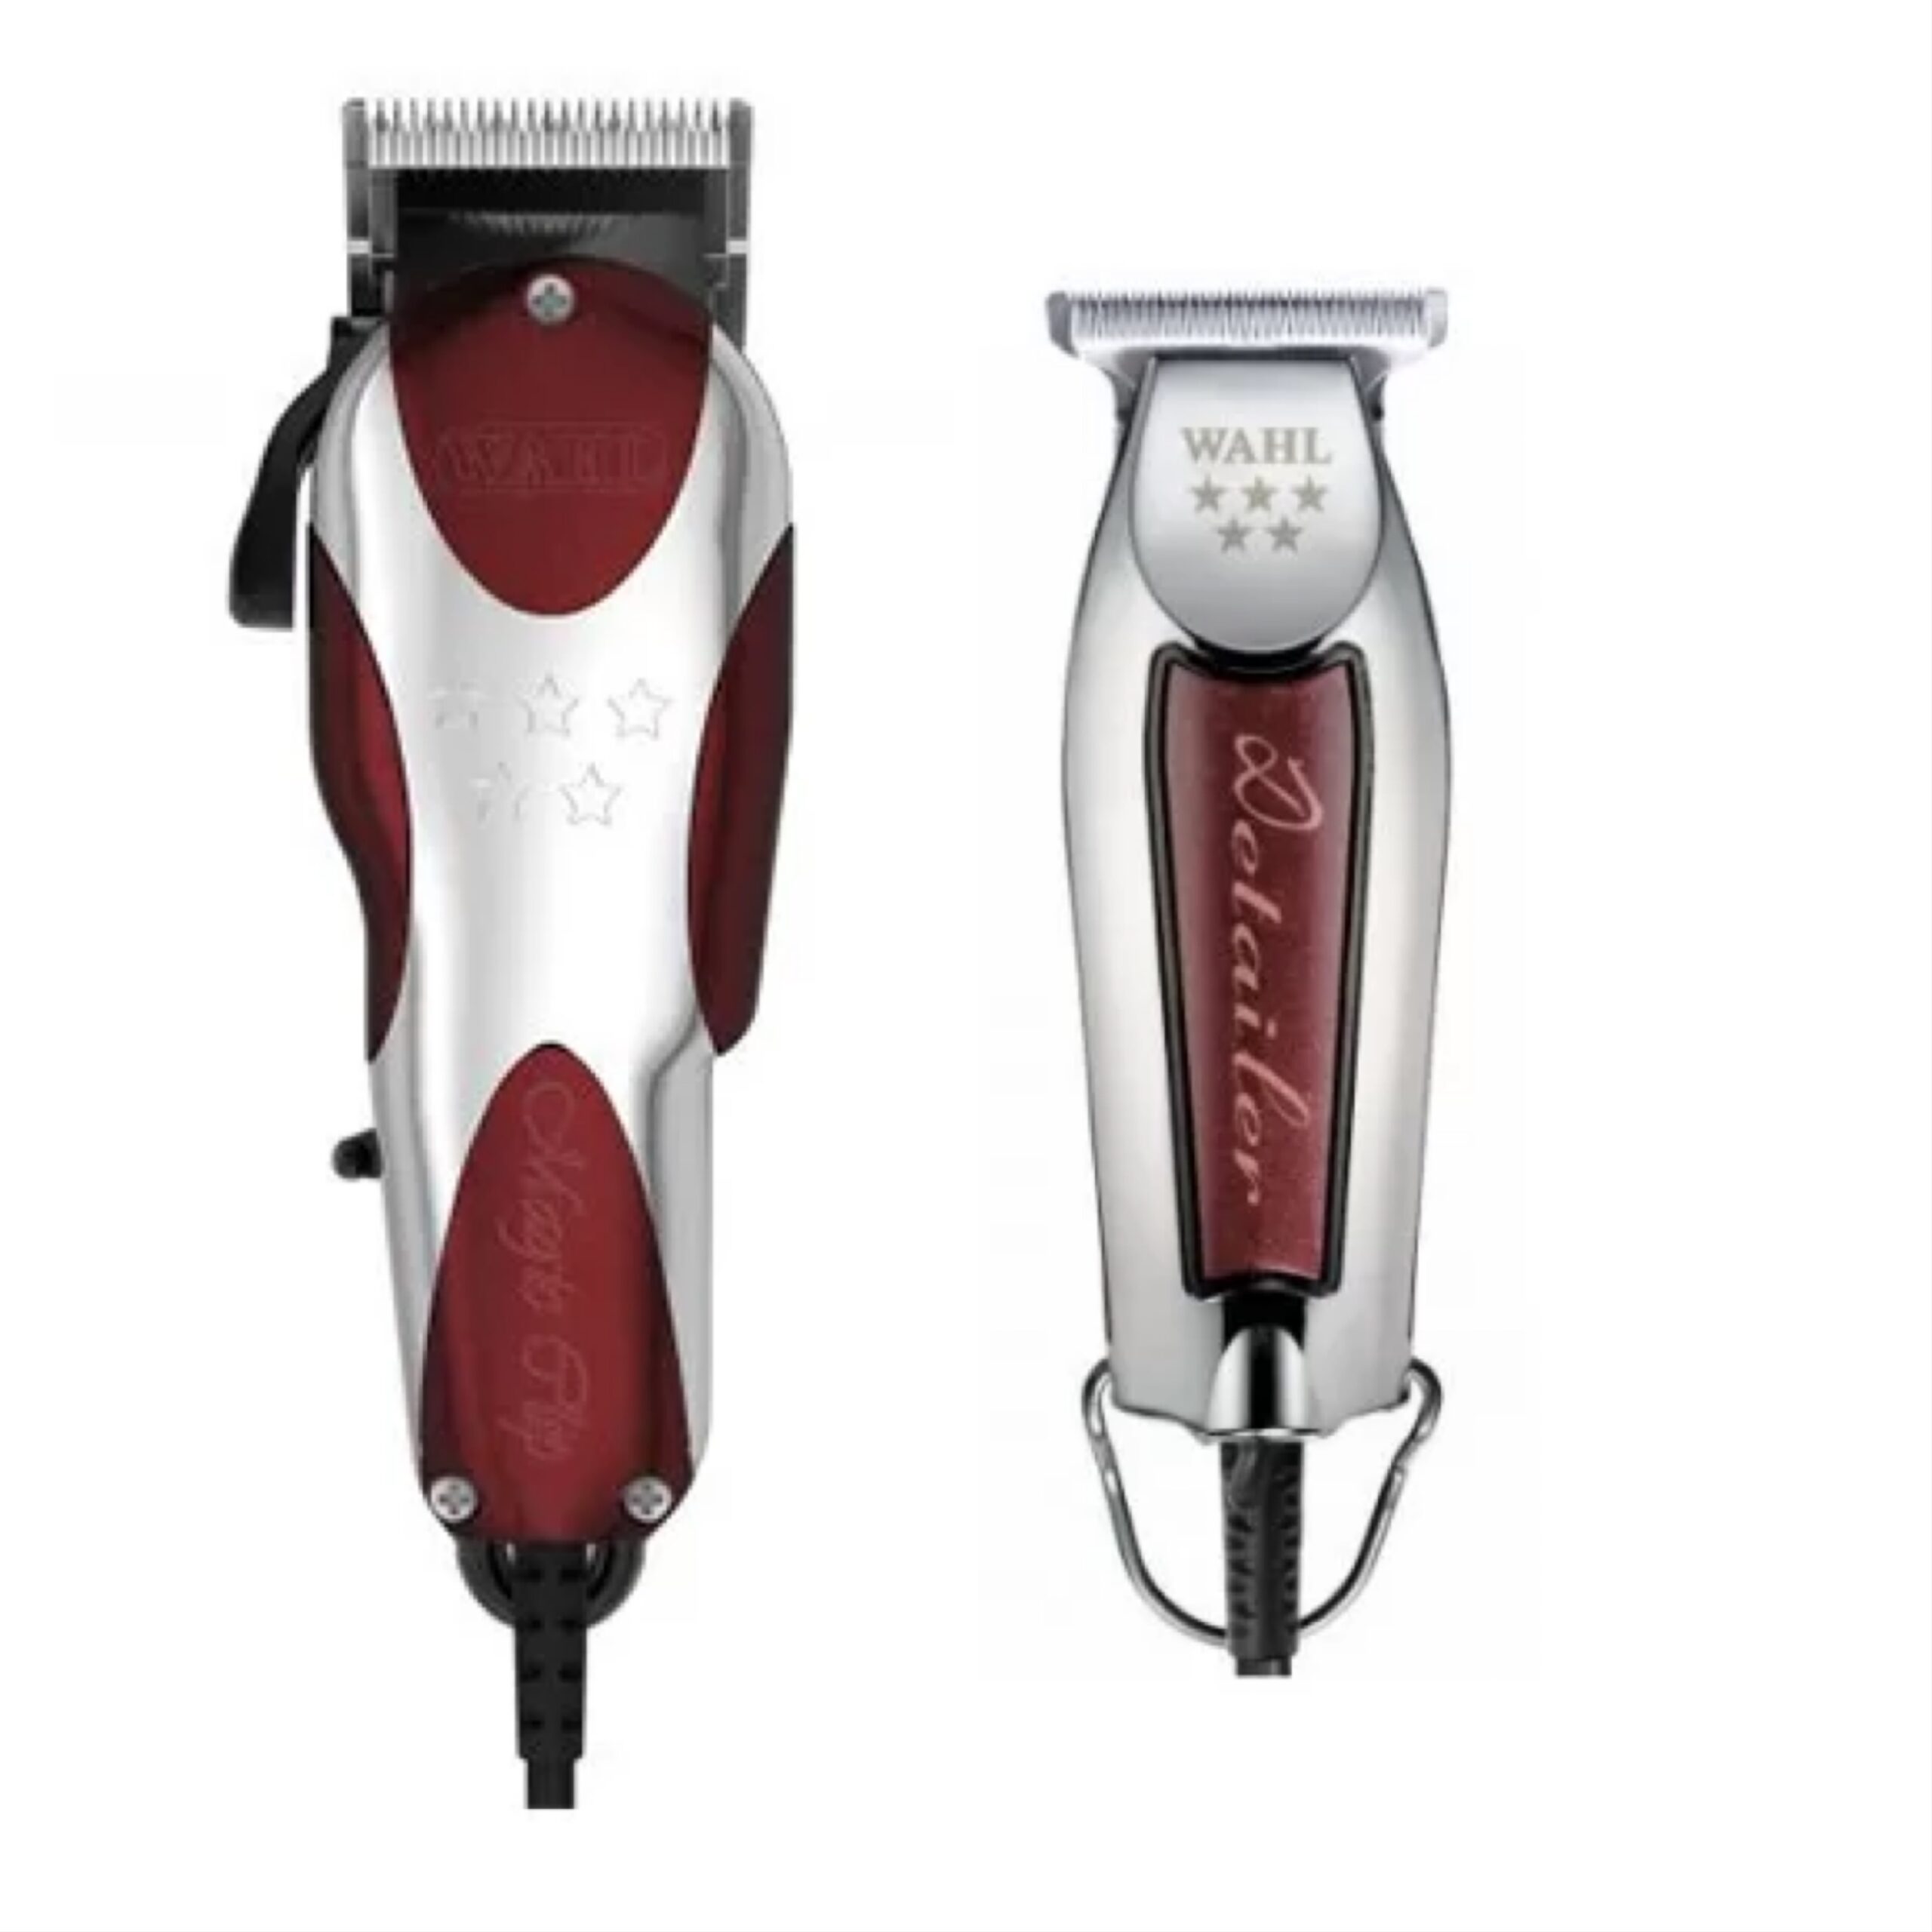 Wahl pro 2pc combo by ibs - Corded magic clip & corded 5 star detailer T-wide